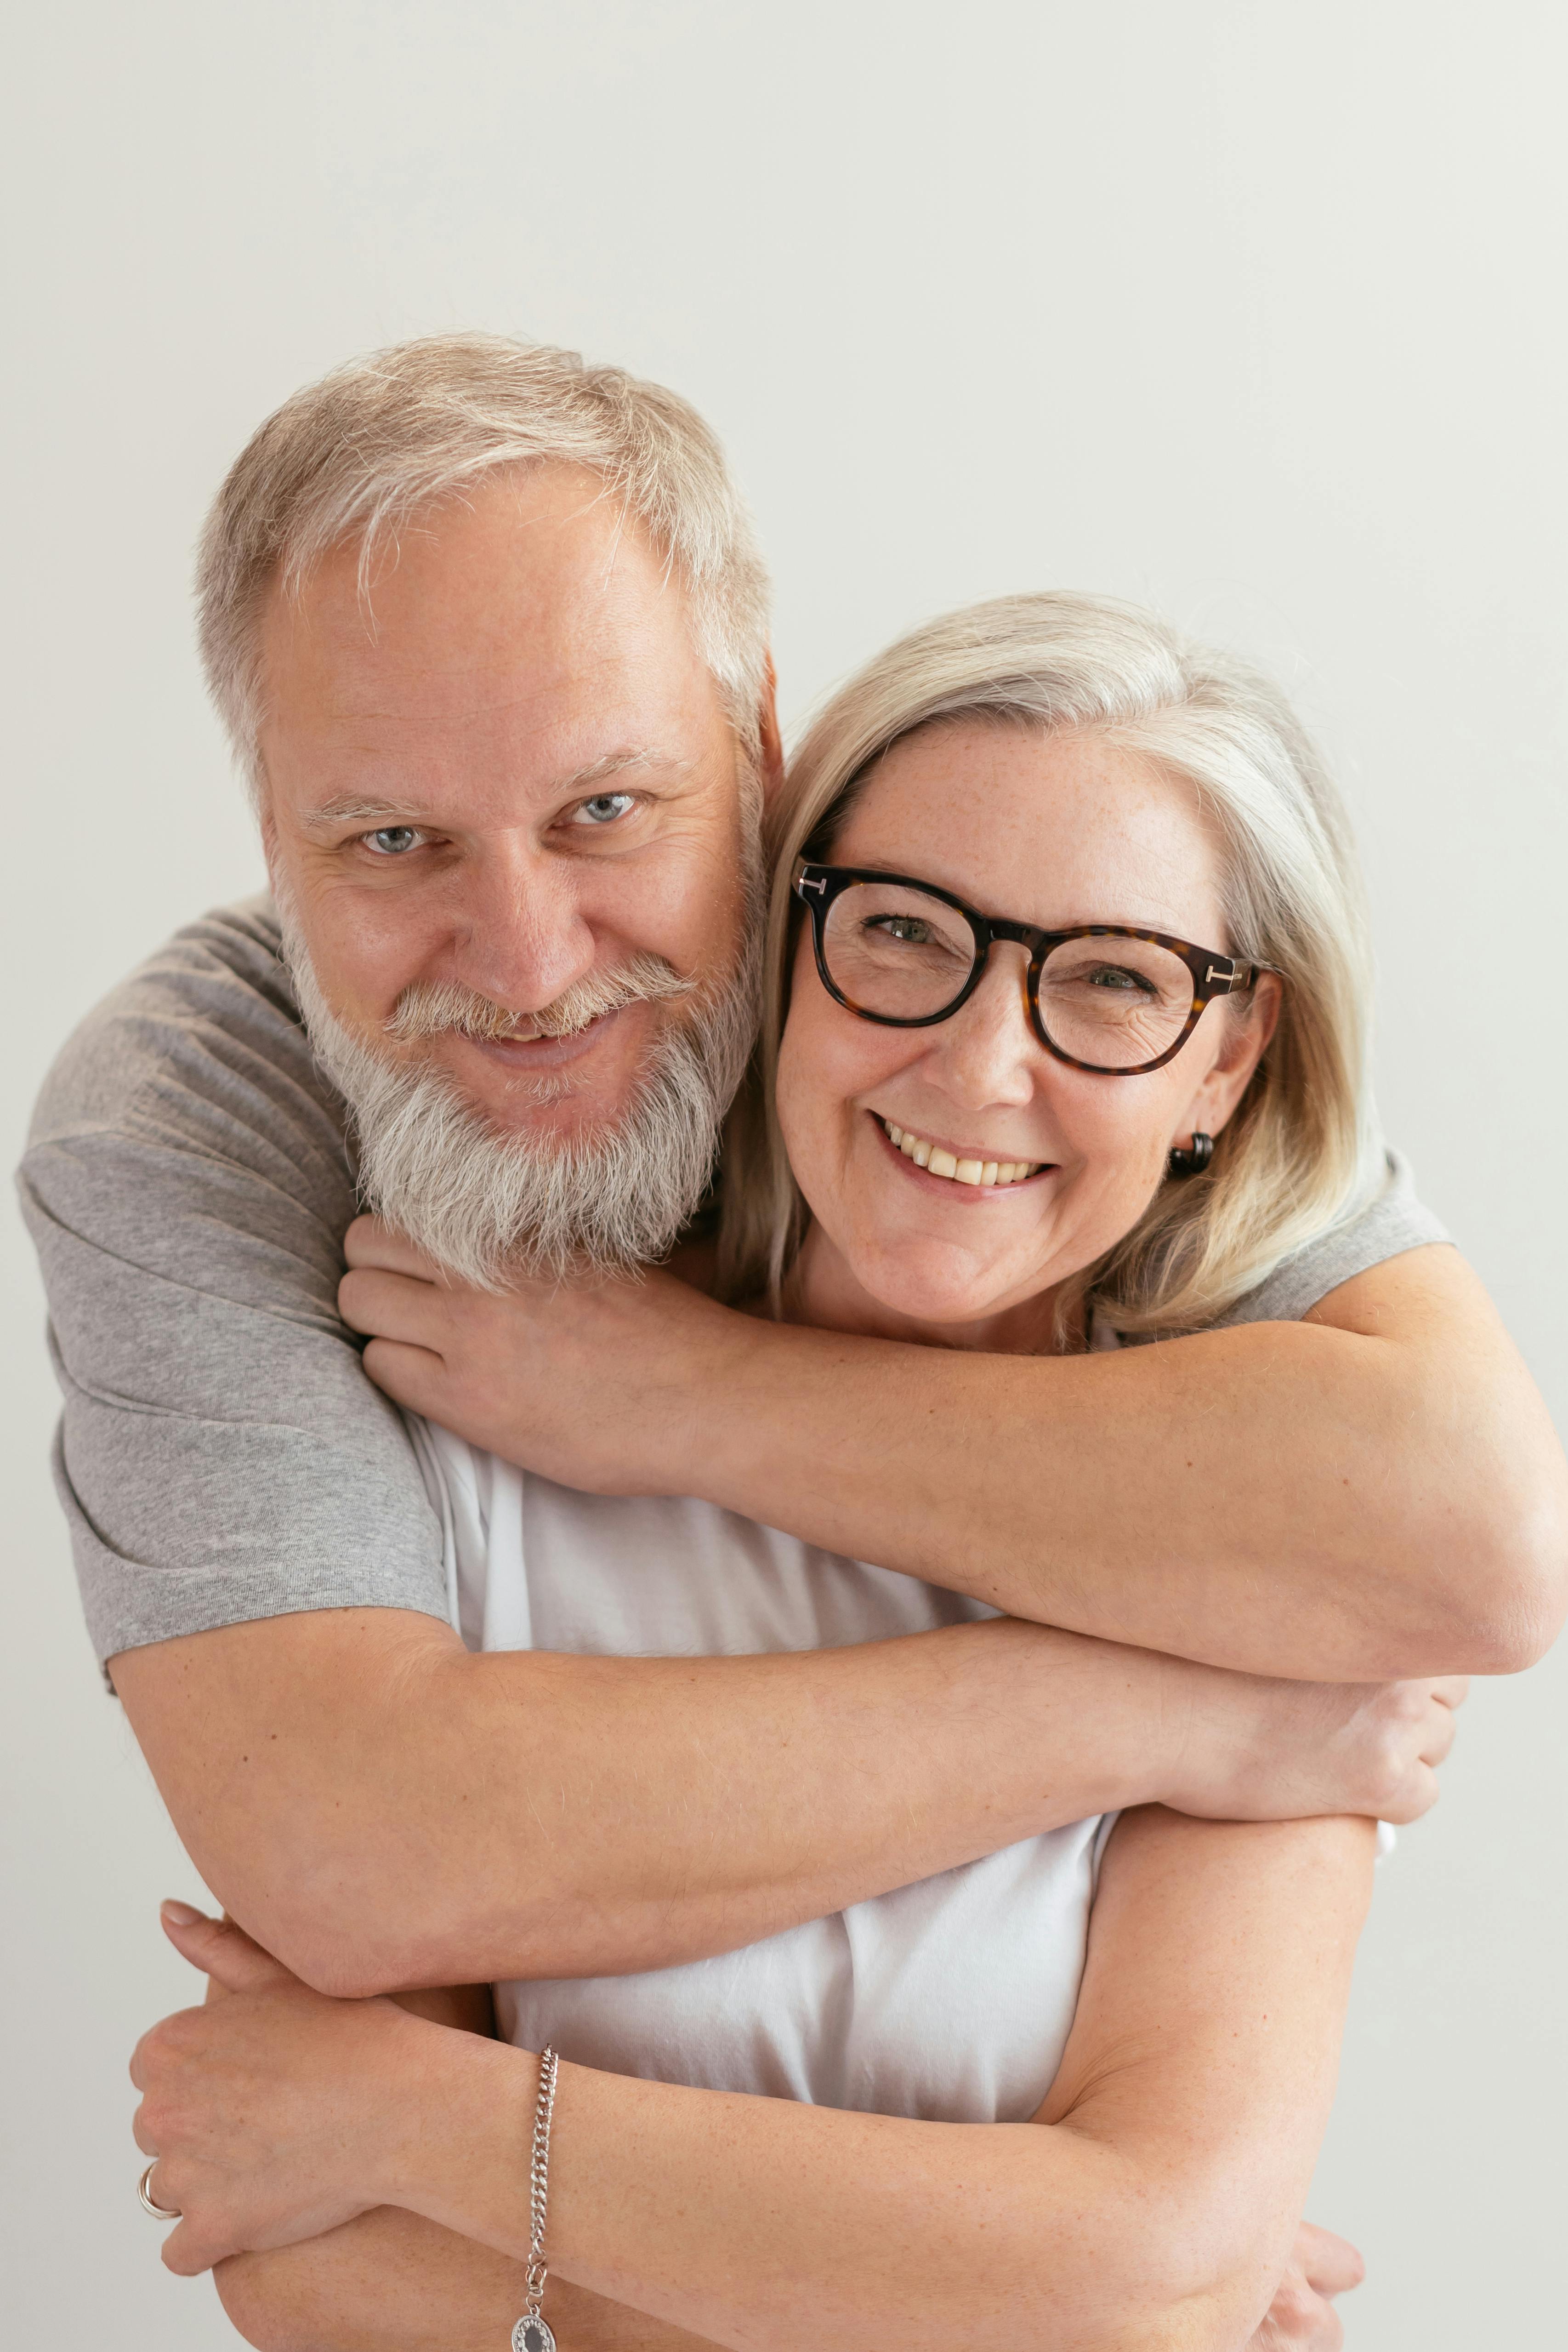 A happy man embracing a woman from behind | Source: Pexels